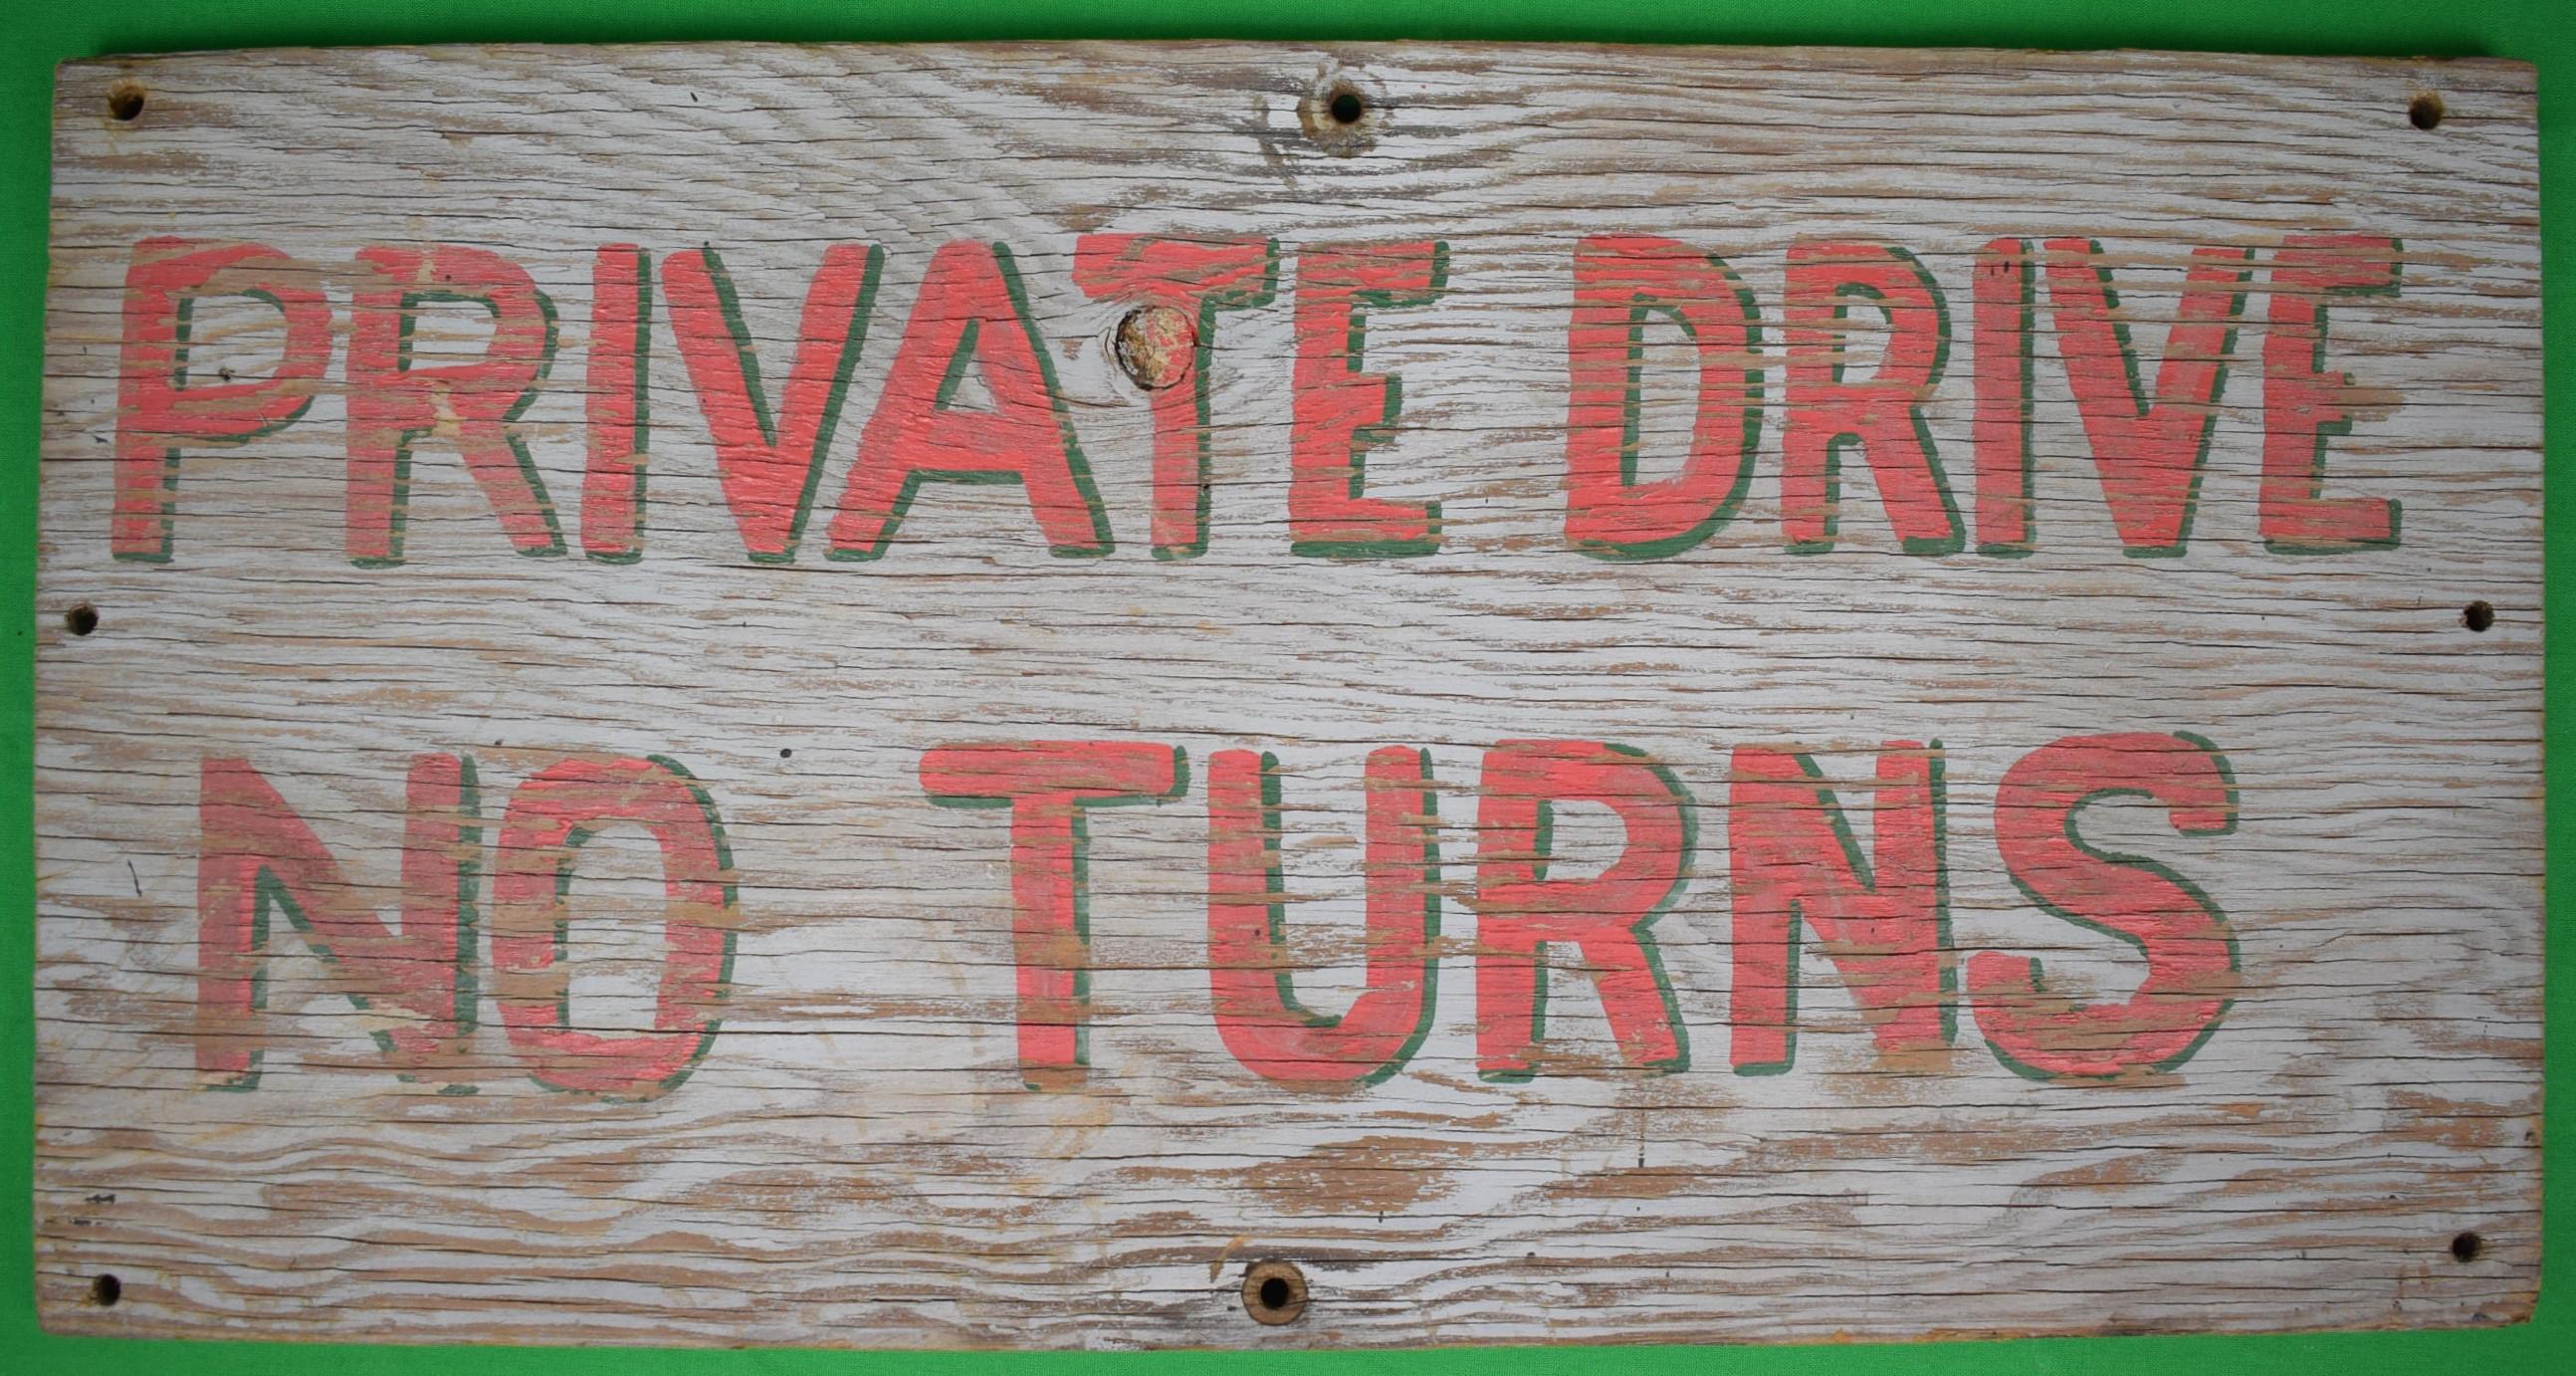 Private Drive/ No Turns Hand-Painted Camp Wood Sign - Mixed Media Art by Unknown